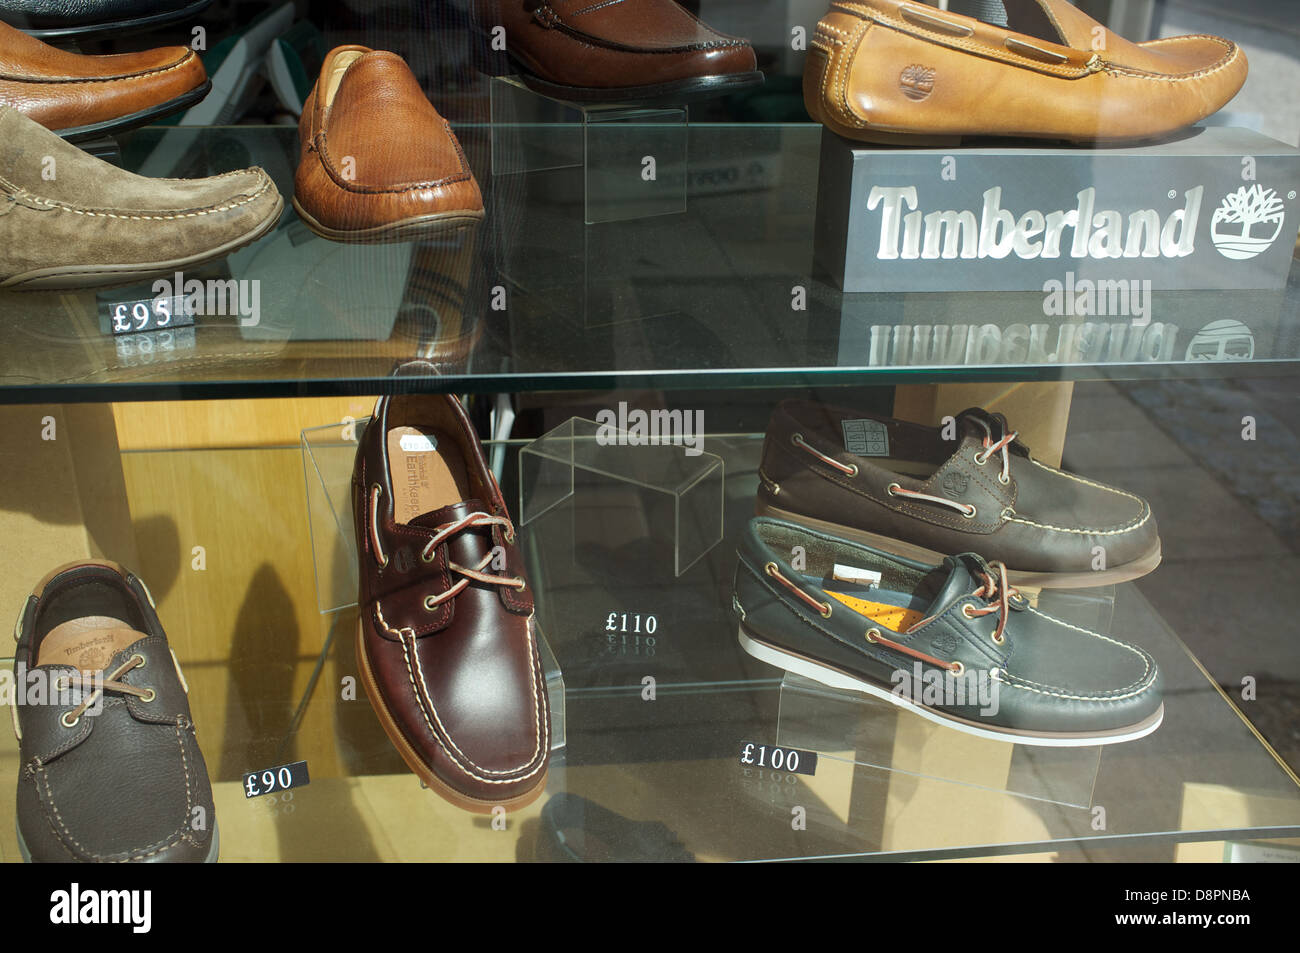 Timberland shoes on display in shop window Stock Photo - Alamy